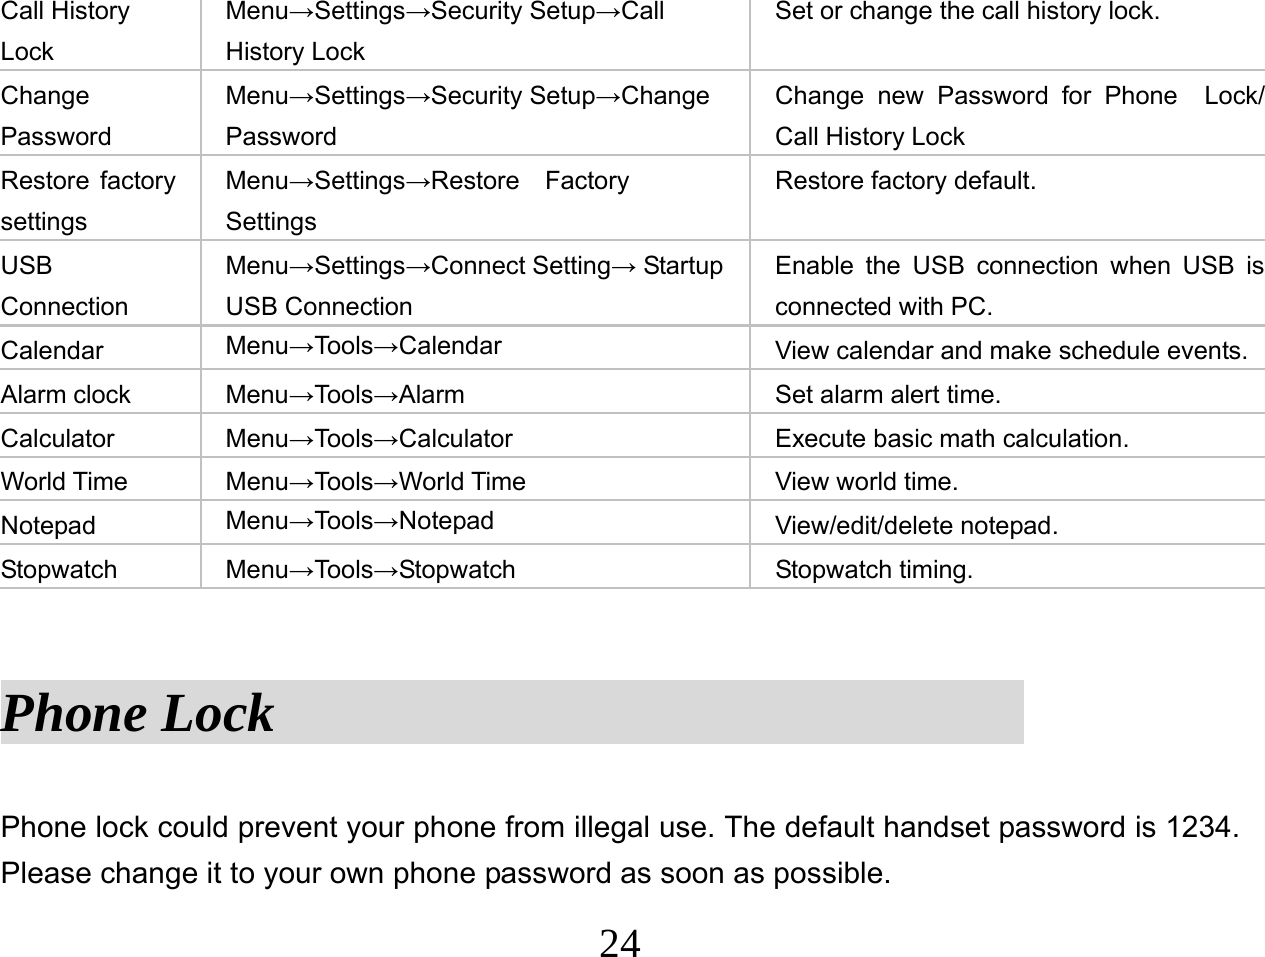  24Call History Lock Menu→Settings→Security Setup→Call History Lock Set or change the call history lock. Change Password Menu→Settings→Security Setup→Change Password Change new Password for Phone  Lock/ Call History Lock Restore factory settings Menu→Settings→Restore  Factory Settings Restore factory default. USB Connection Menu→Settings→Connect Setting→ Startup USB Connection Enable the USB connection when USB is connected with PC. Calendar  Menu→Tools→Calendar  View calendar and make schedule events. Alarm clock  Menu→Tools→Alarm  Set alarm alert time. Calculator Menu→Tools→Calculator  Execute basic math calculation. World Time  Menu→Tools→World Time  View world time. Notepad  Menu→Tools→Notepad  View/edit/delete notepad. Stopwatch Menu→Tools→Stopwatch Stopwatch timing.  Phone Lock                            Phone lock could prevent your phone from illegal use. The default handset password is 1234. Please change it to your own phone password as soon as possible. 